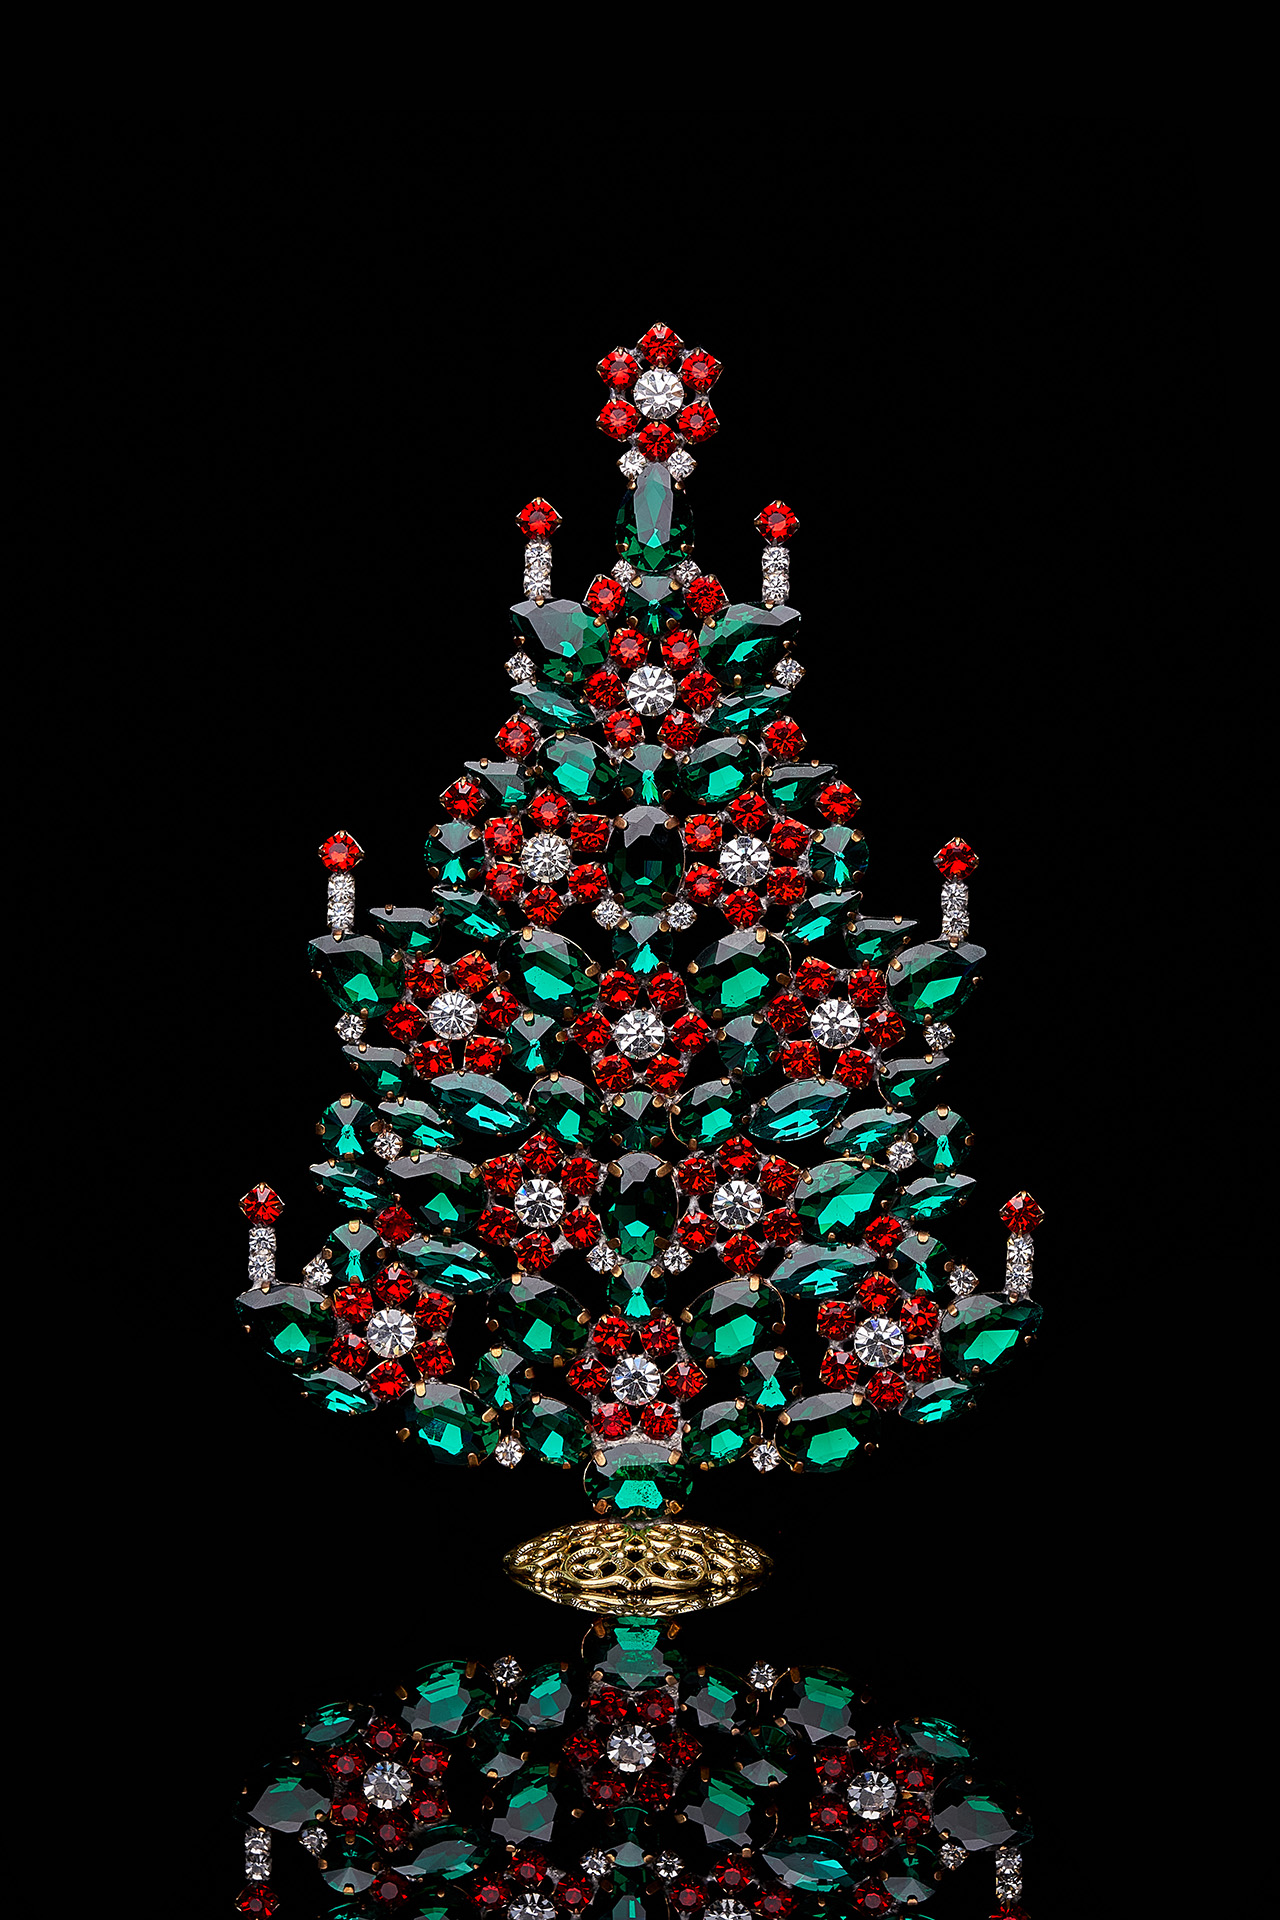 Sparkly Christmas tree handmade with rhinestones in festive colors